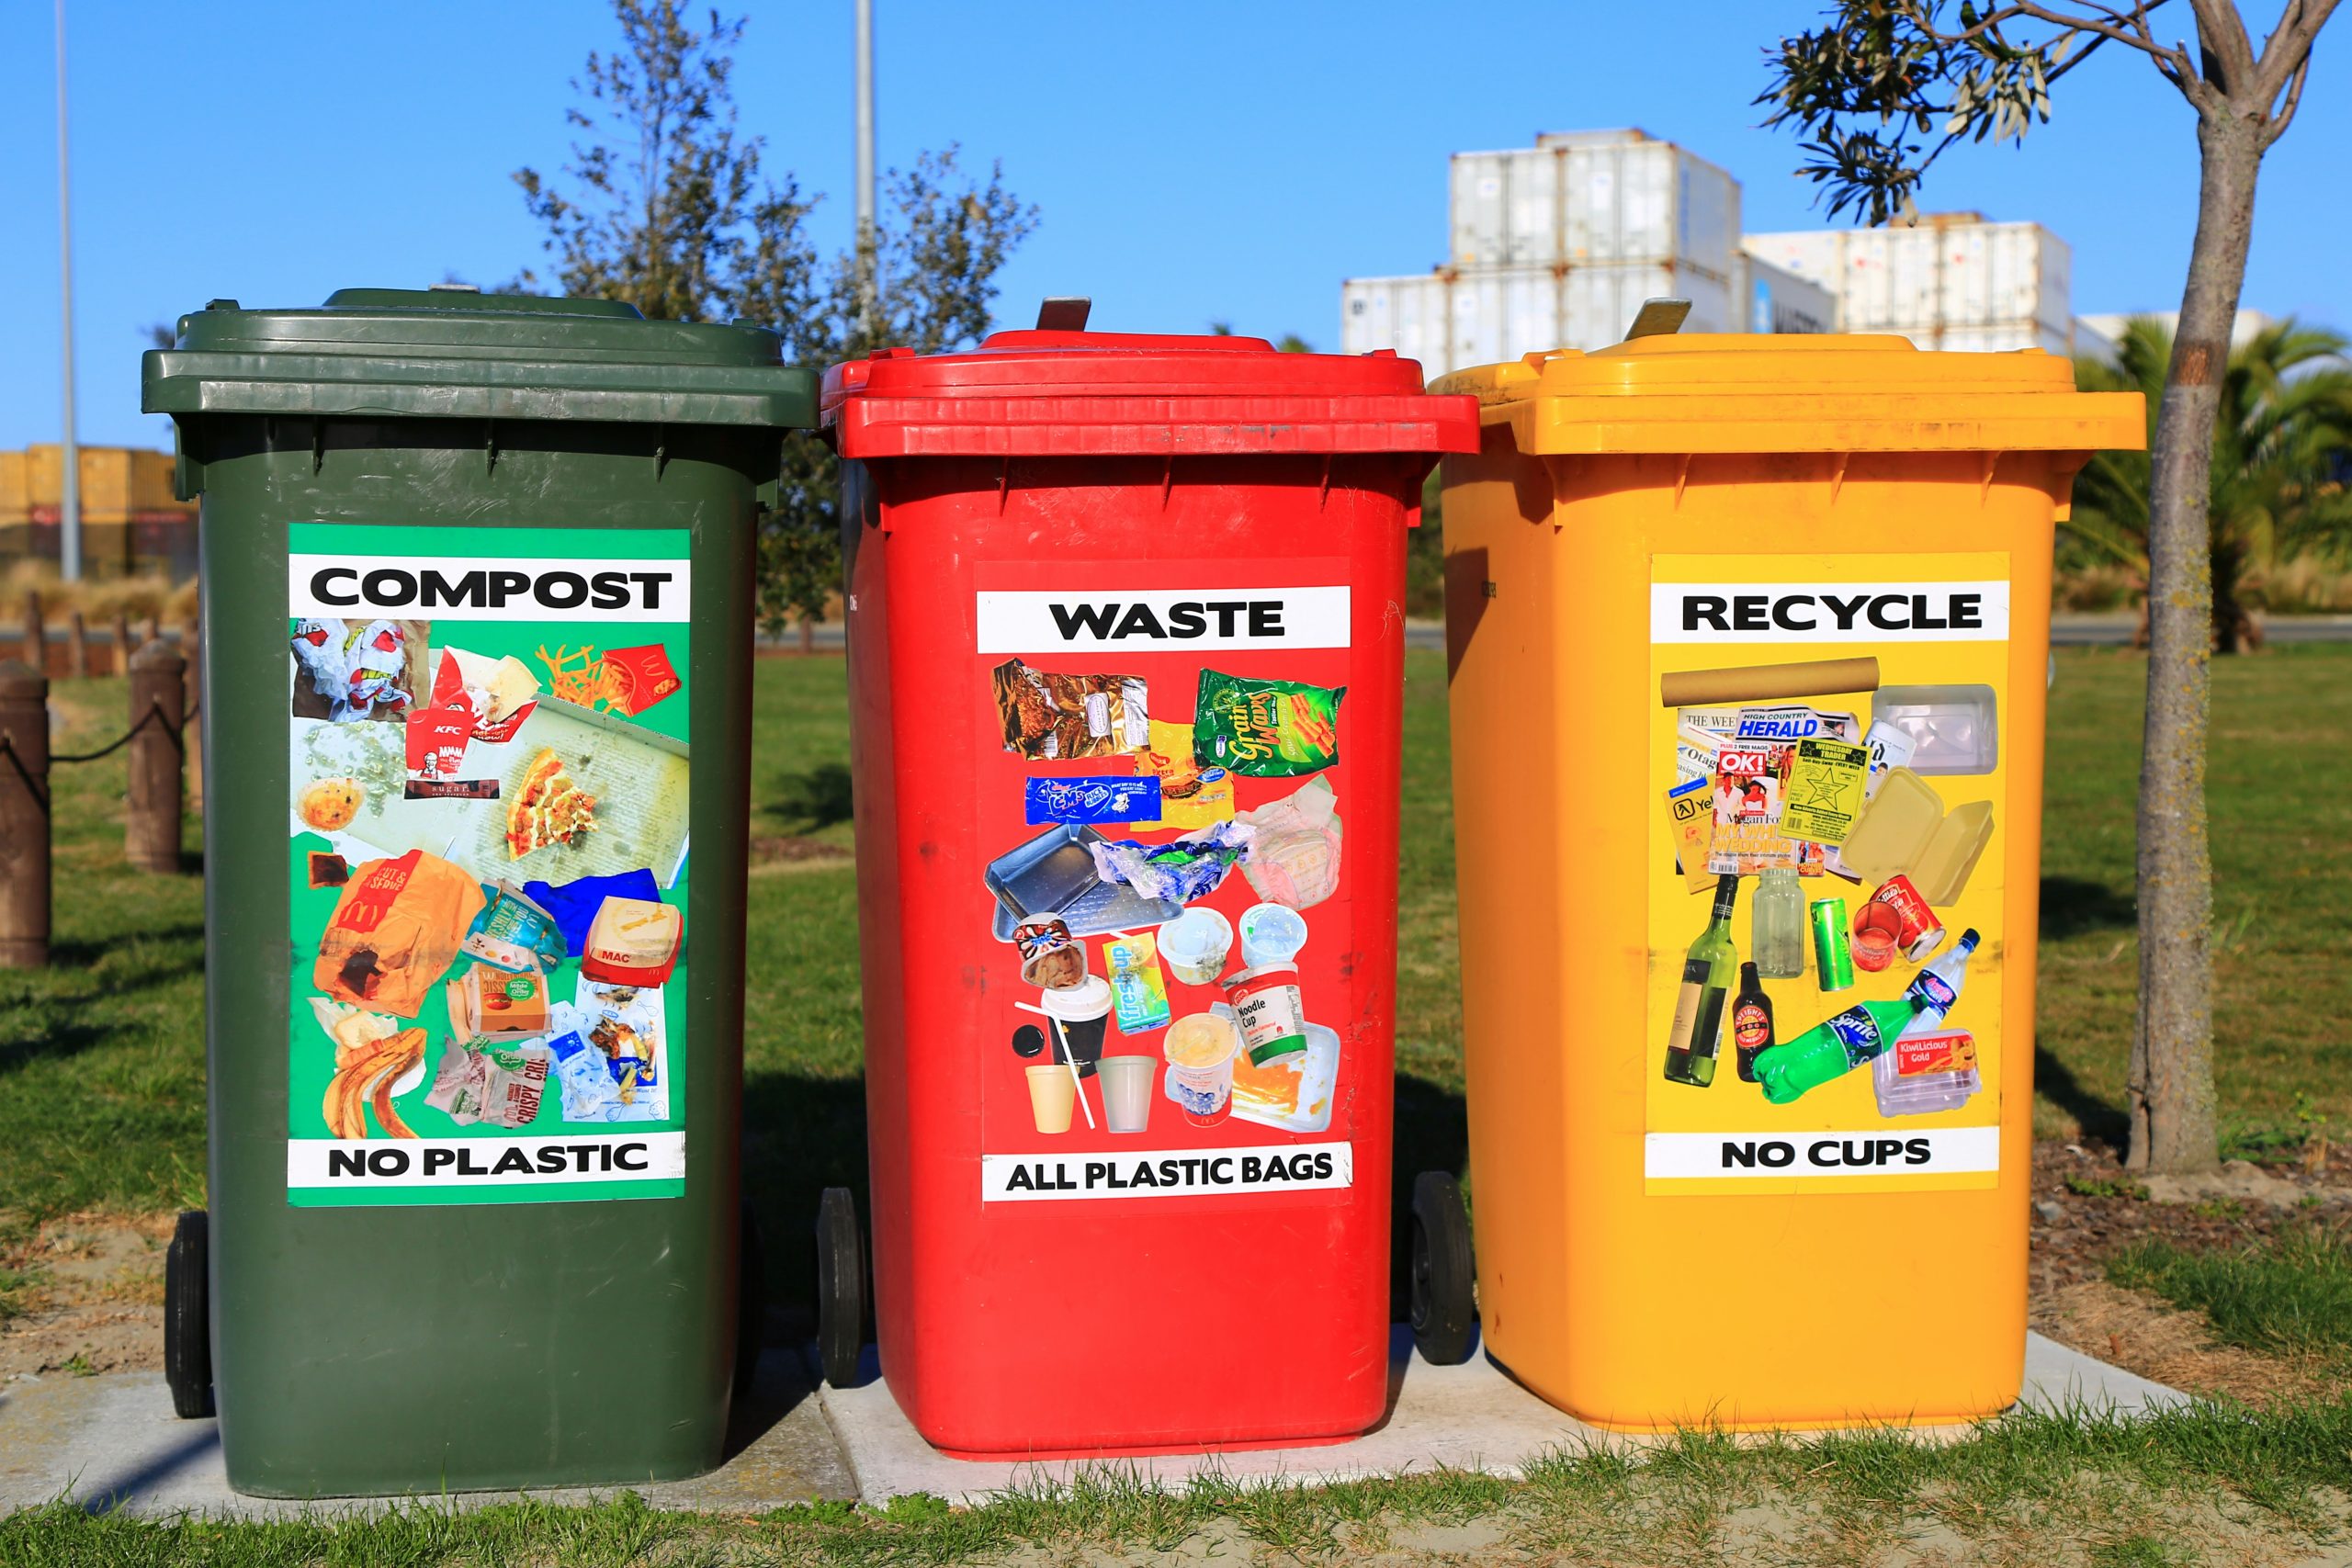 3 colored garbage bins for waste diversion